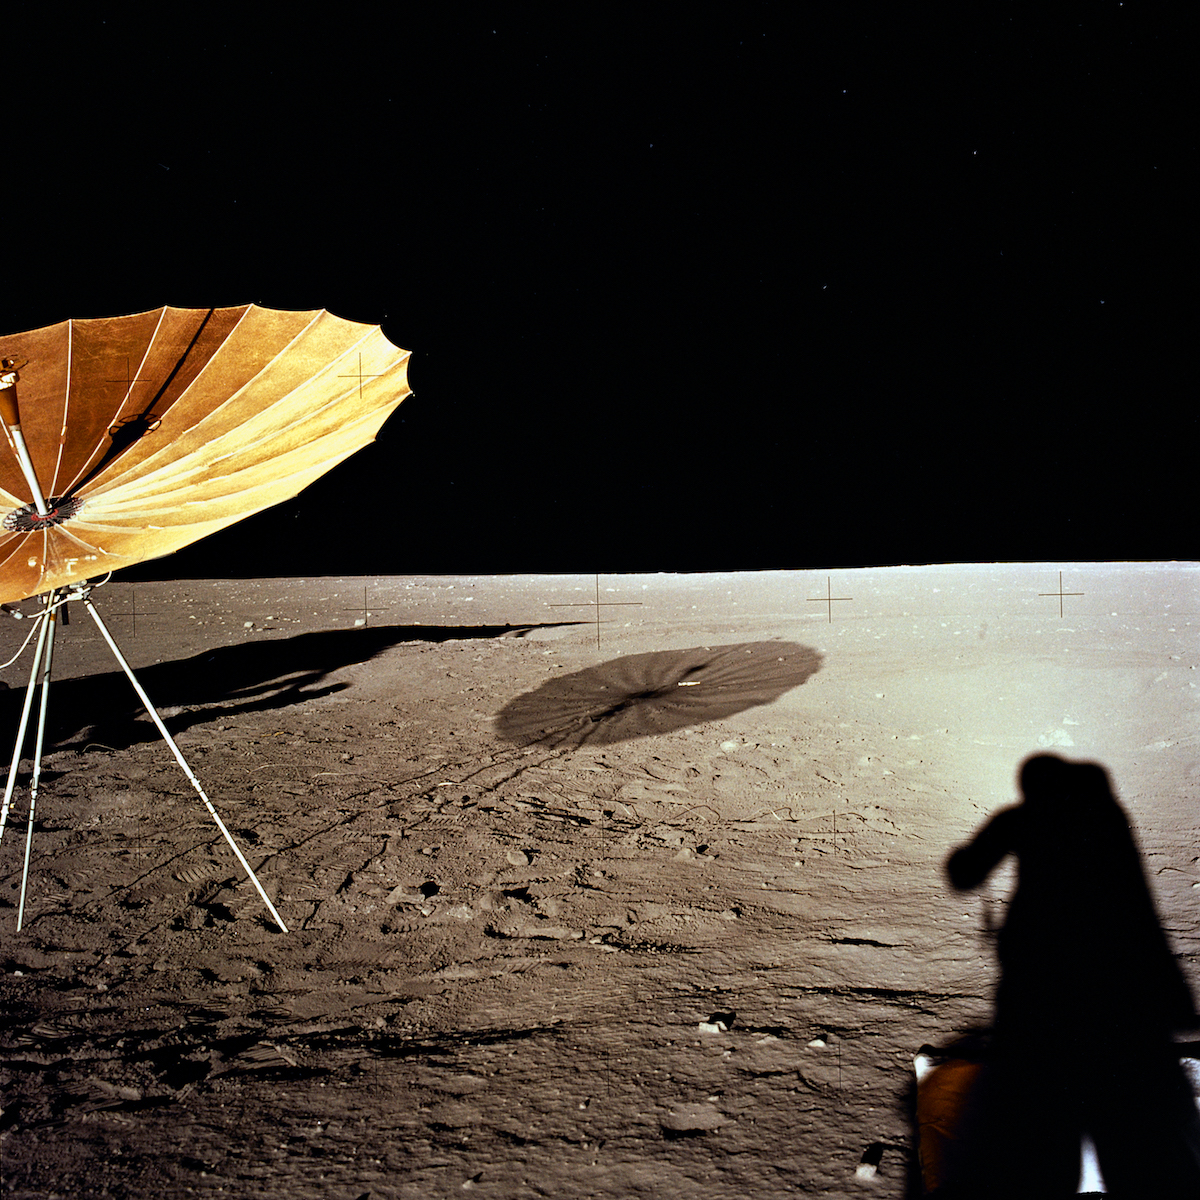 an antenna deployed on the Moon's surface and an astronaut's shadow